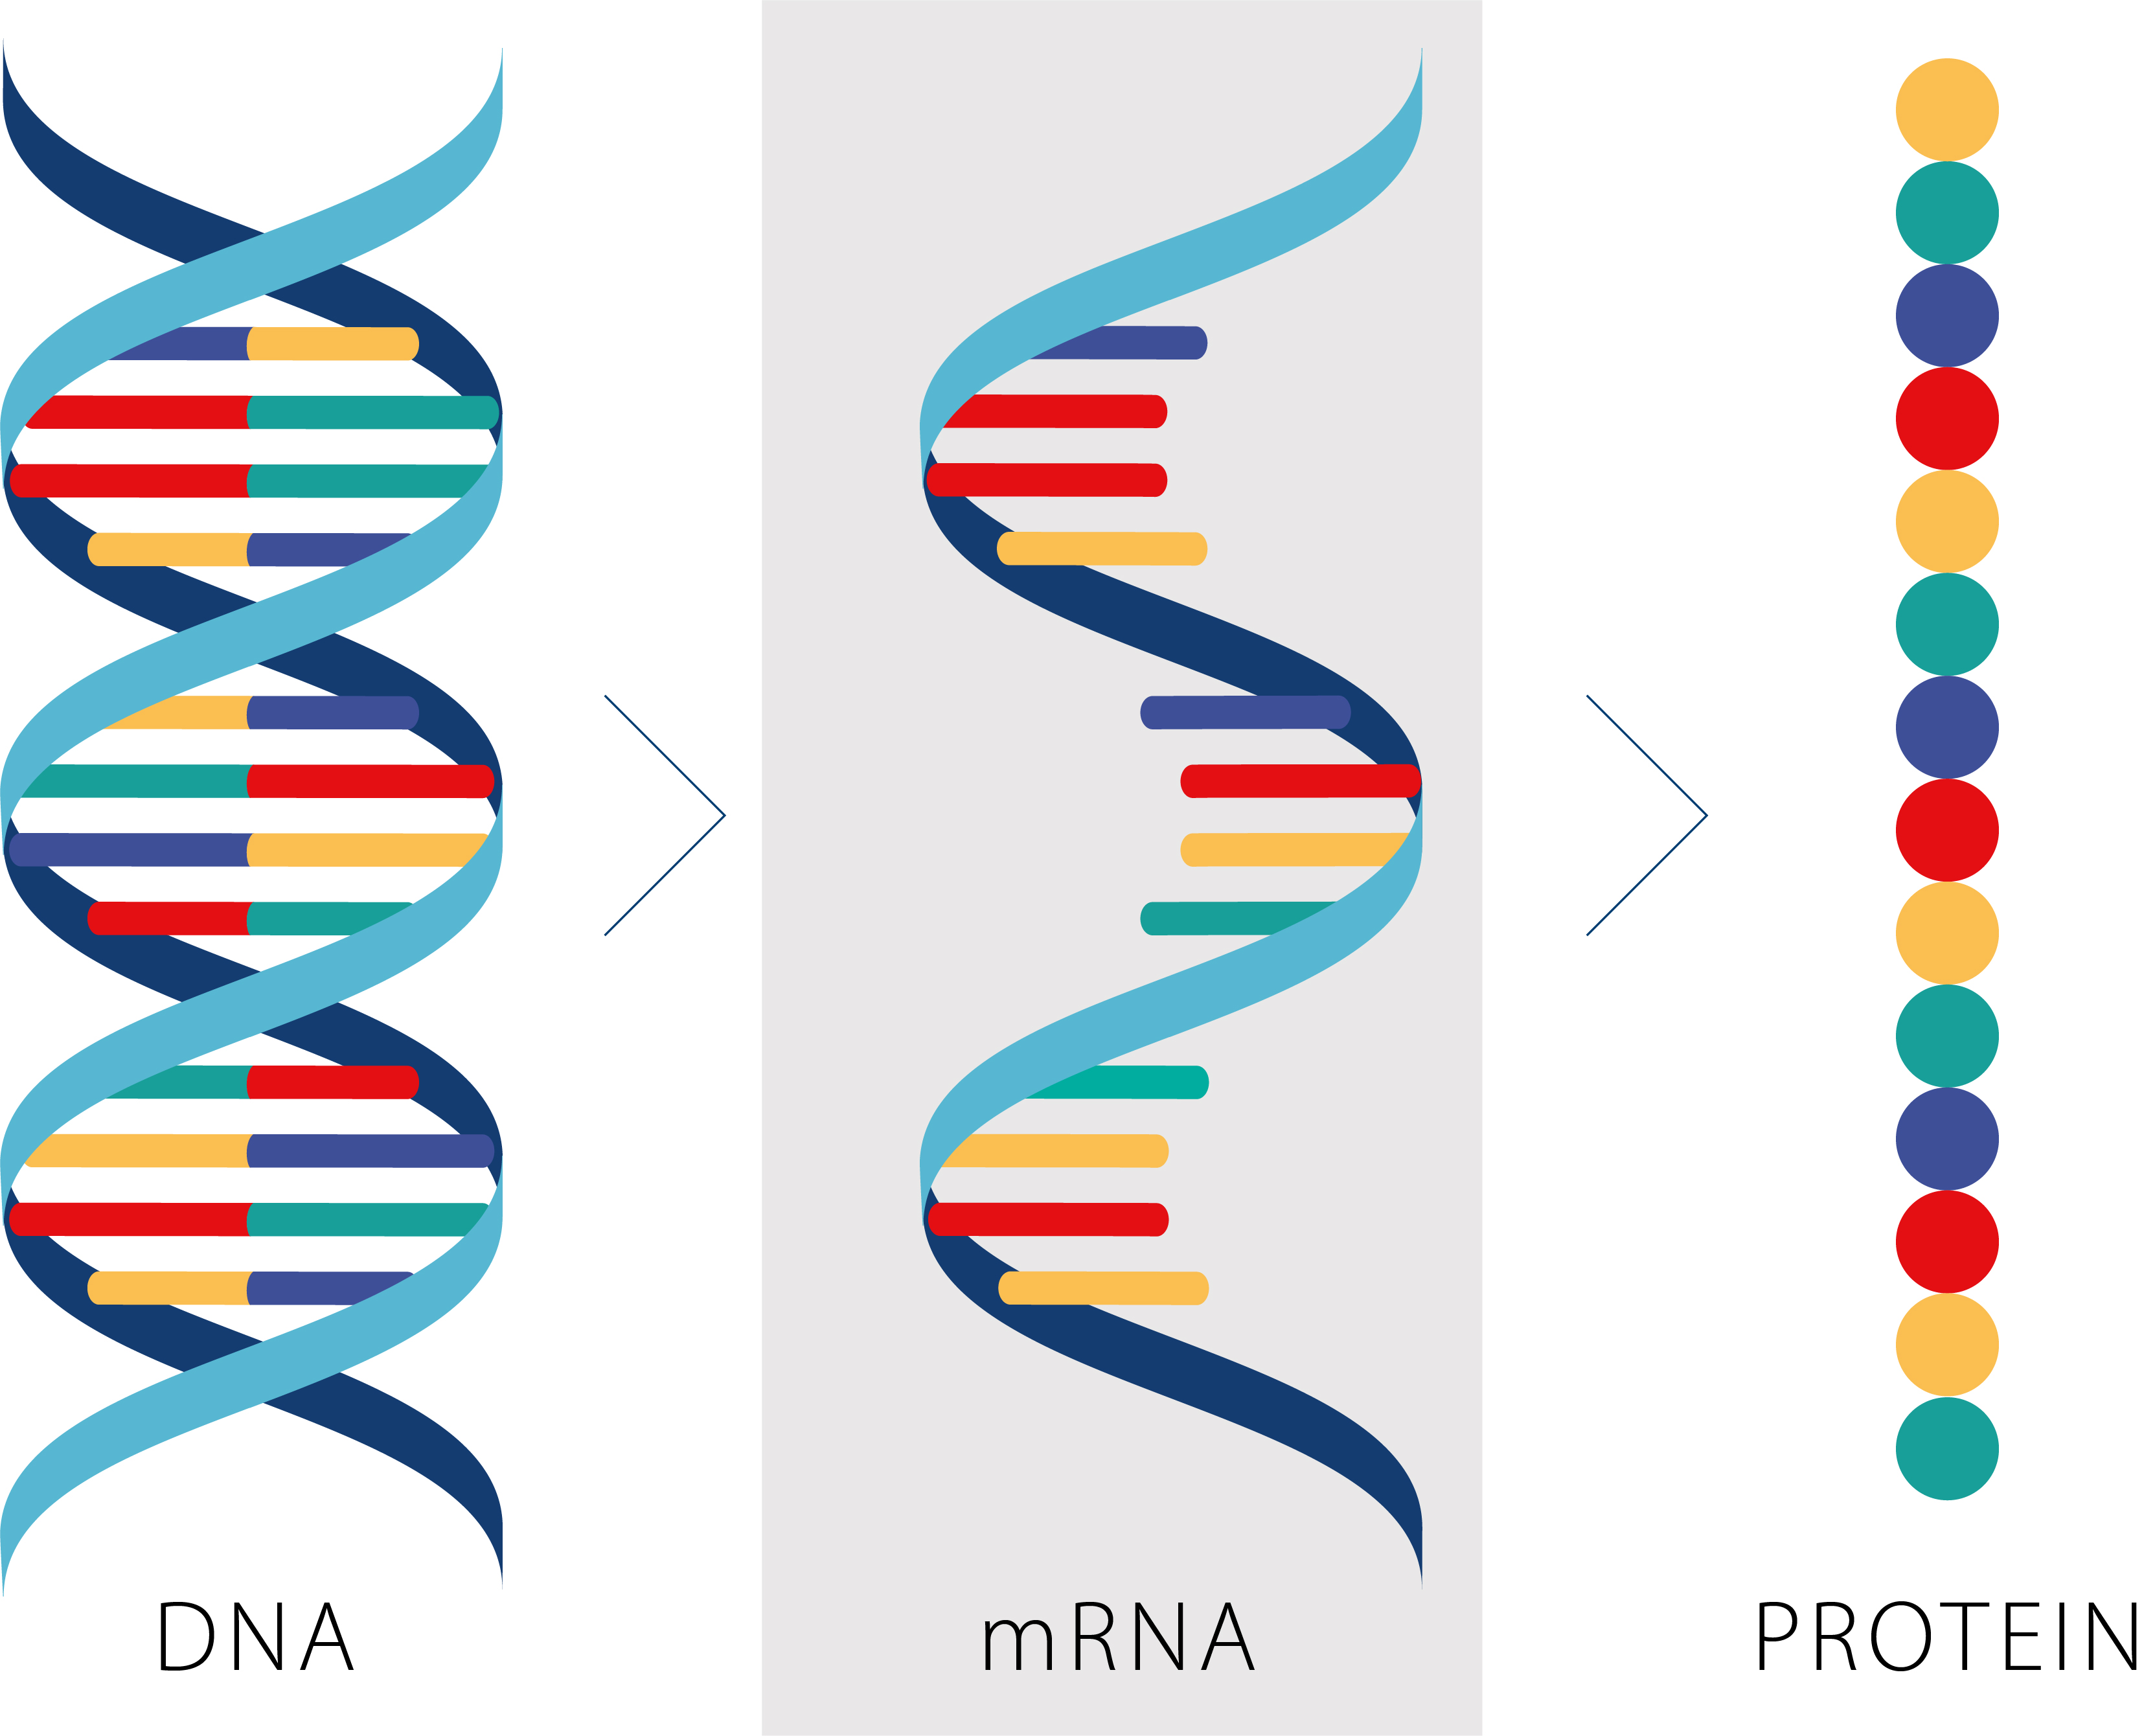 A diagram shows DNA > mRNA > protein. 